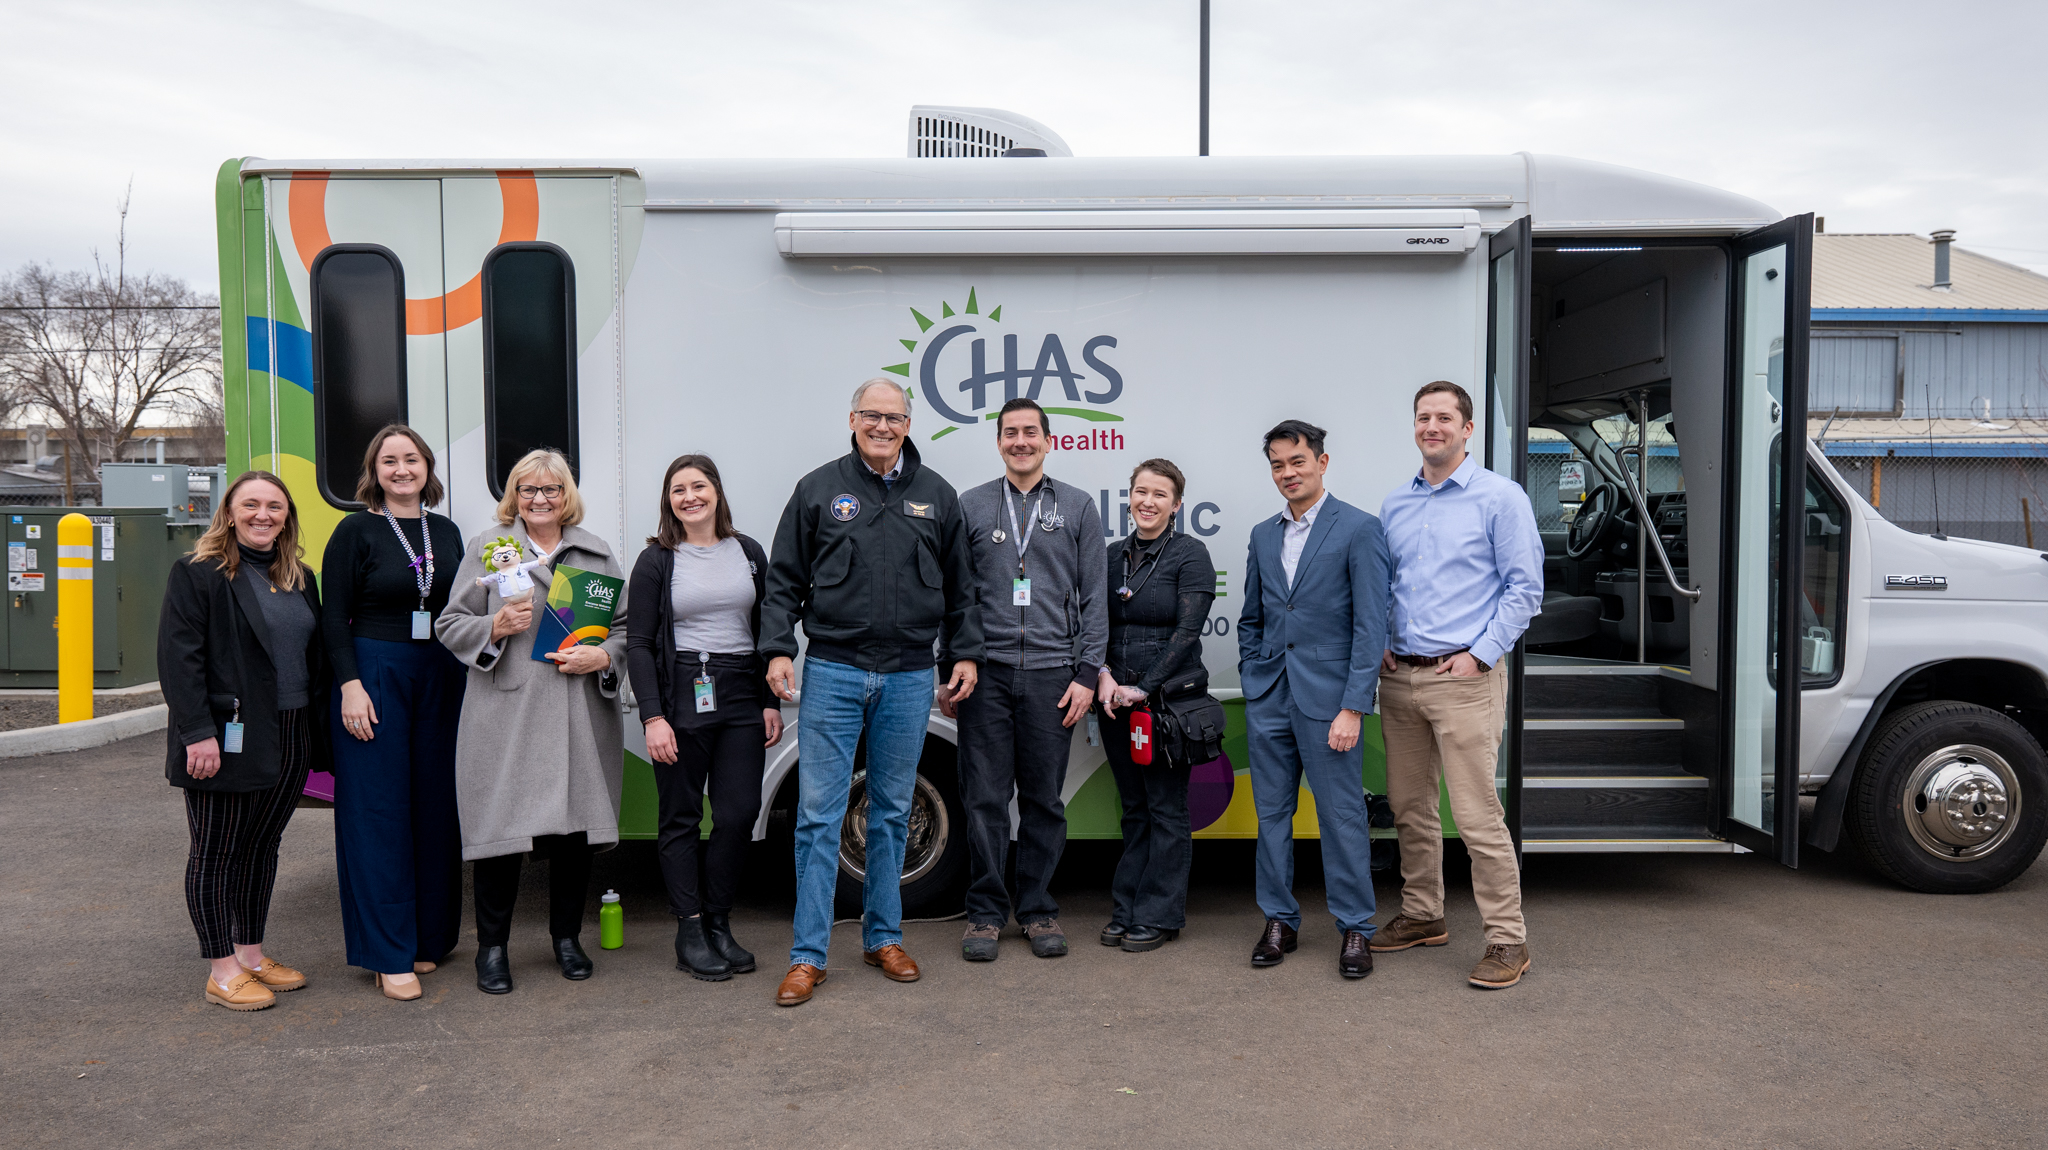 From left to right: Health Equity Director, Shelby Lambdin, Public Policy Specialist, Mary Miller, Trudi Inslee, Mobile Medicine Provider Zoey DeLeon, Gov. Inslee, Lead Street Medicine Provider, Louis Manriquez, MD, Wilfred Madagrang, MD and RN William Matney